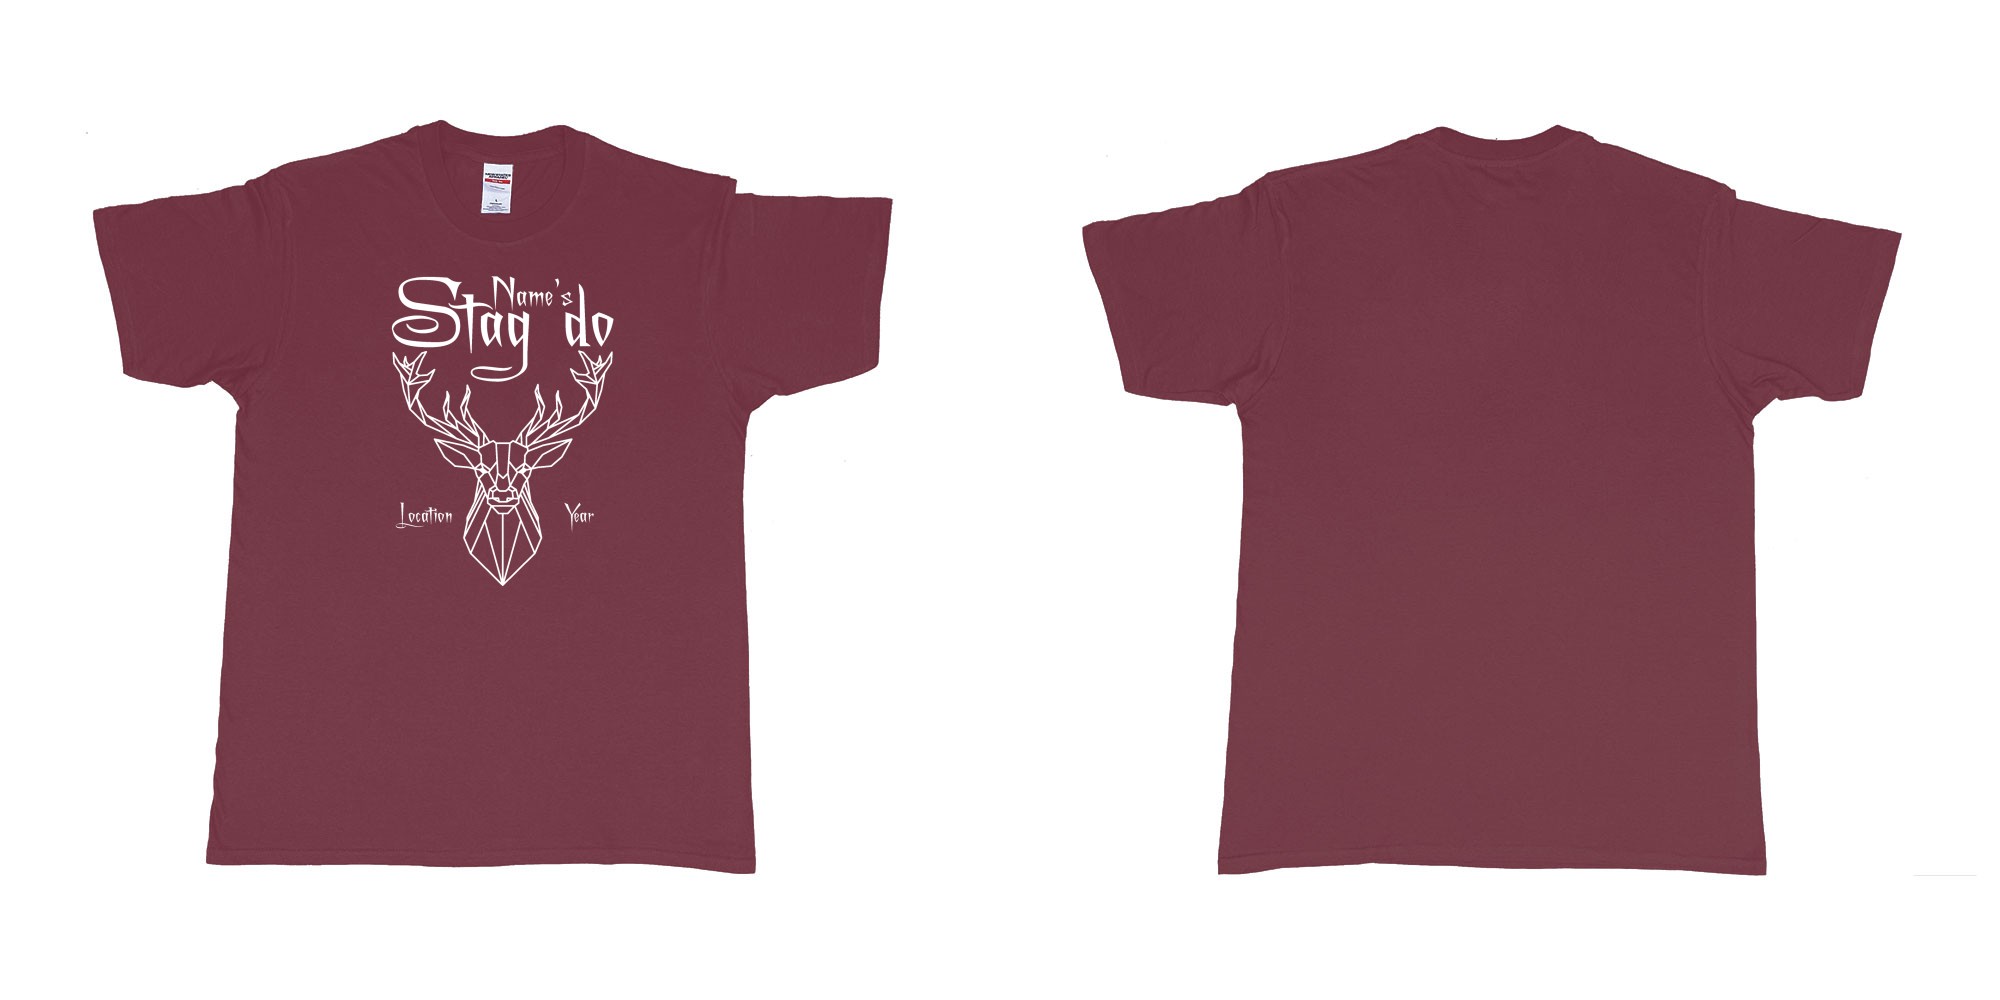 Custom tshirt design stag do design custom location year in fabric color marron choice your own text made in Bali by The Pirate Way